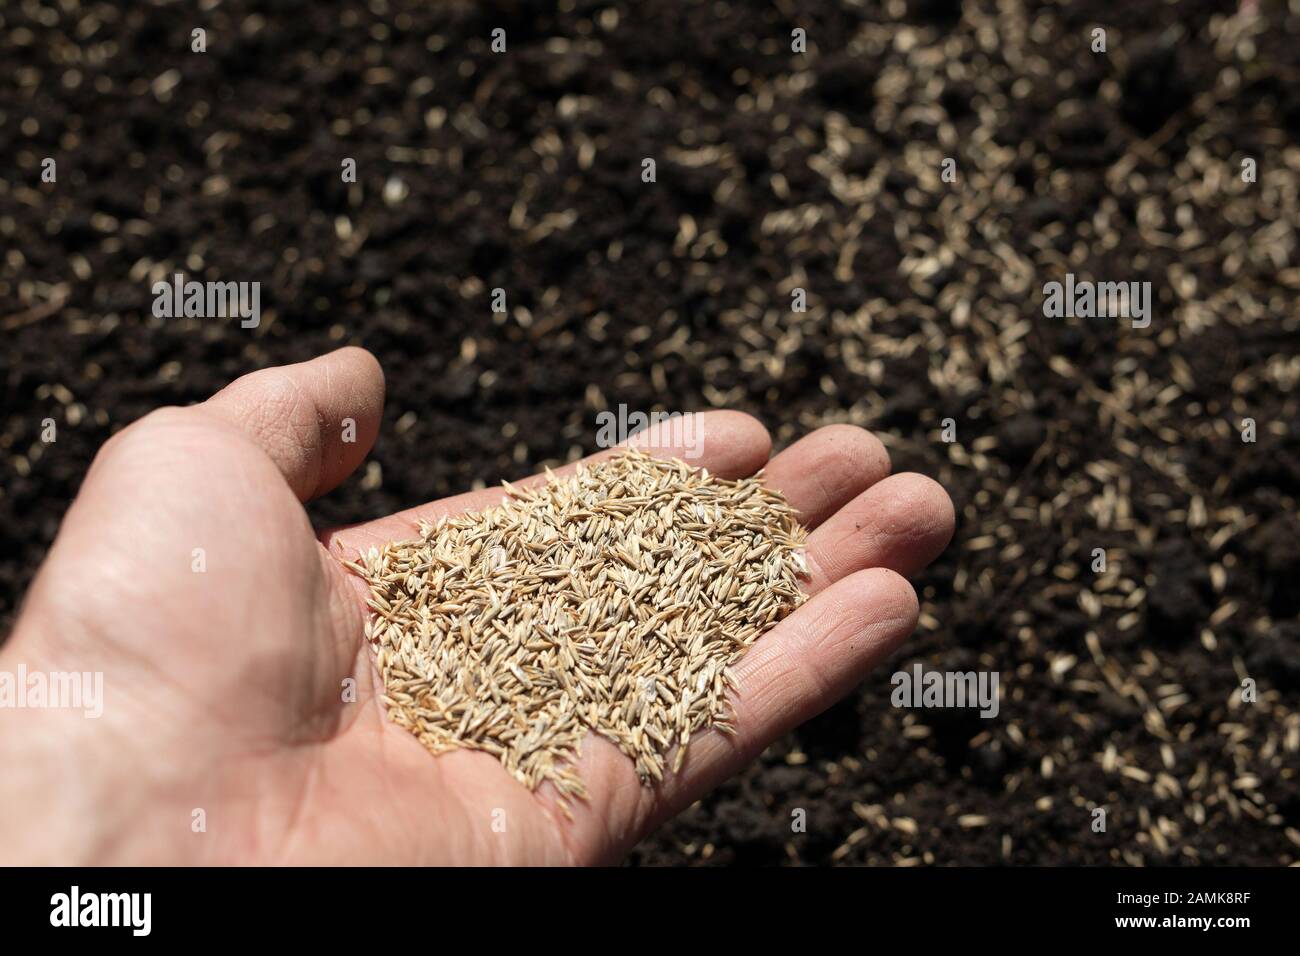 Seeds fall from hand to ground. Sow seeds. Stock Photo